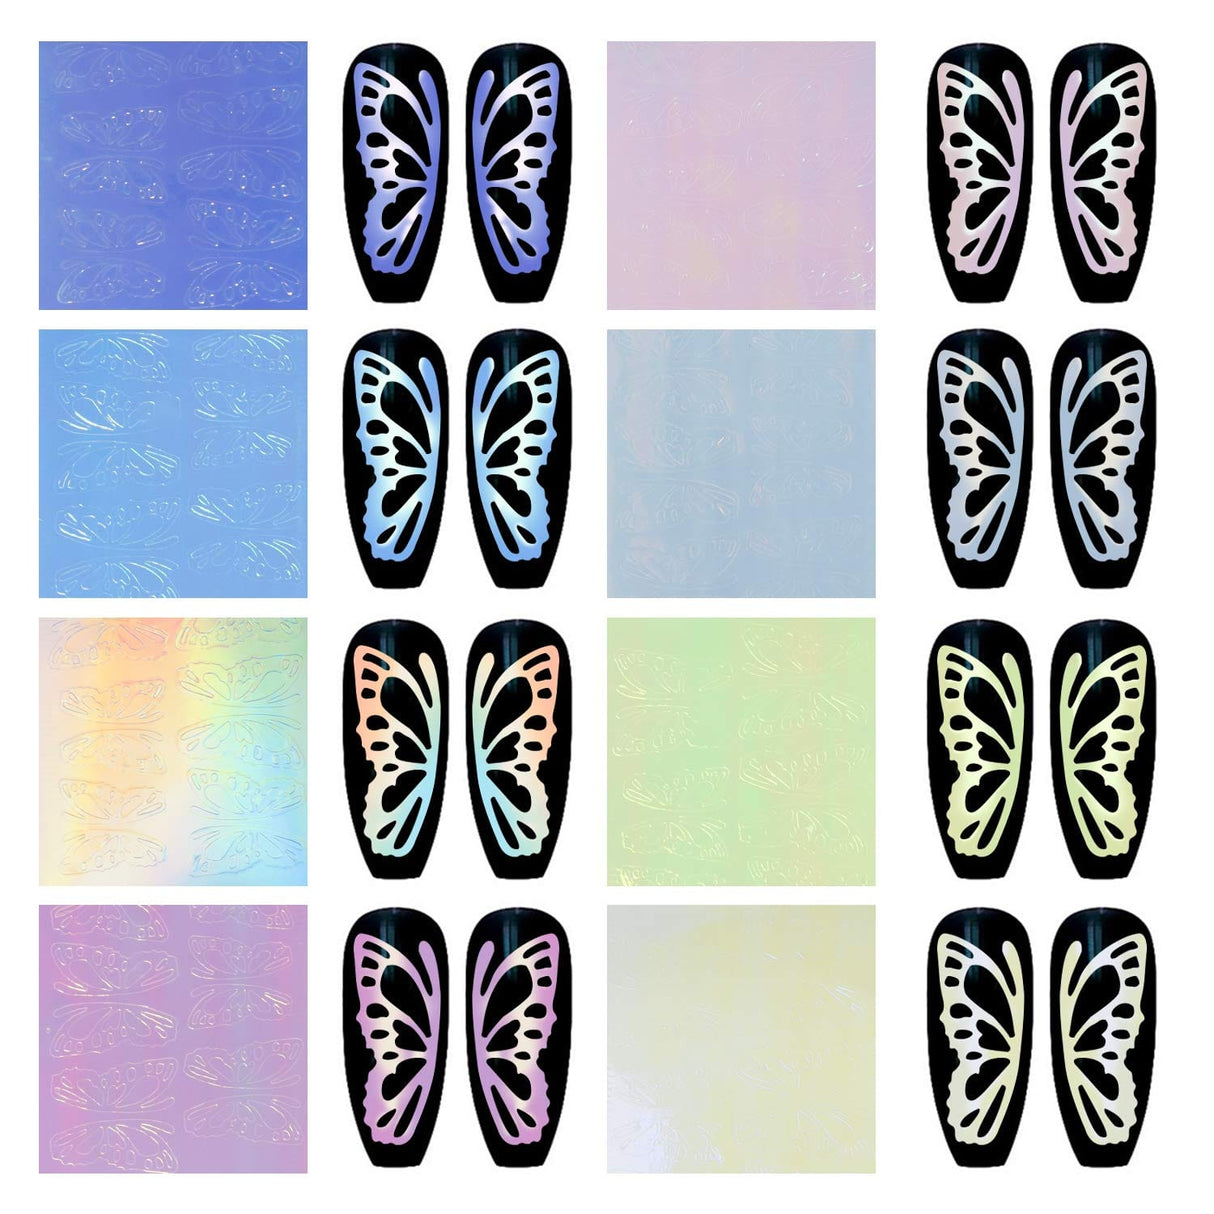 Holographic Butterfly Reflection Nail Stickers Set - Jessica Nail & Beauty Supply - Canada Nail Beauty Supply - NAIL STICKER